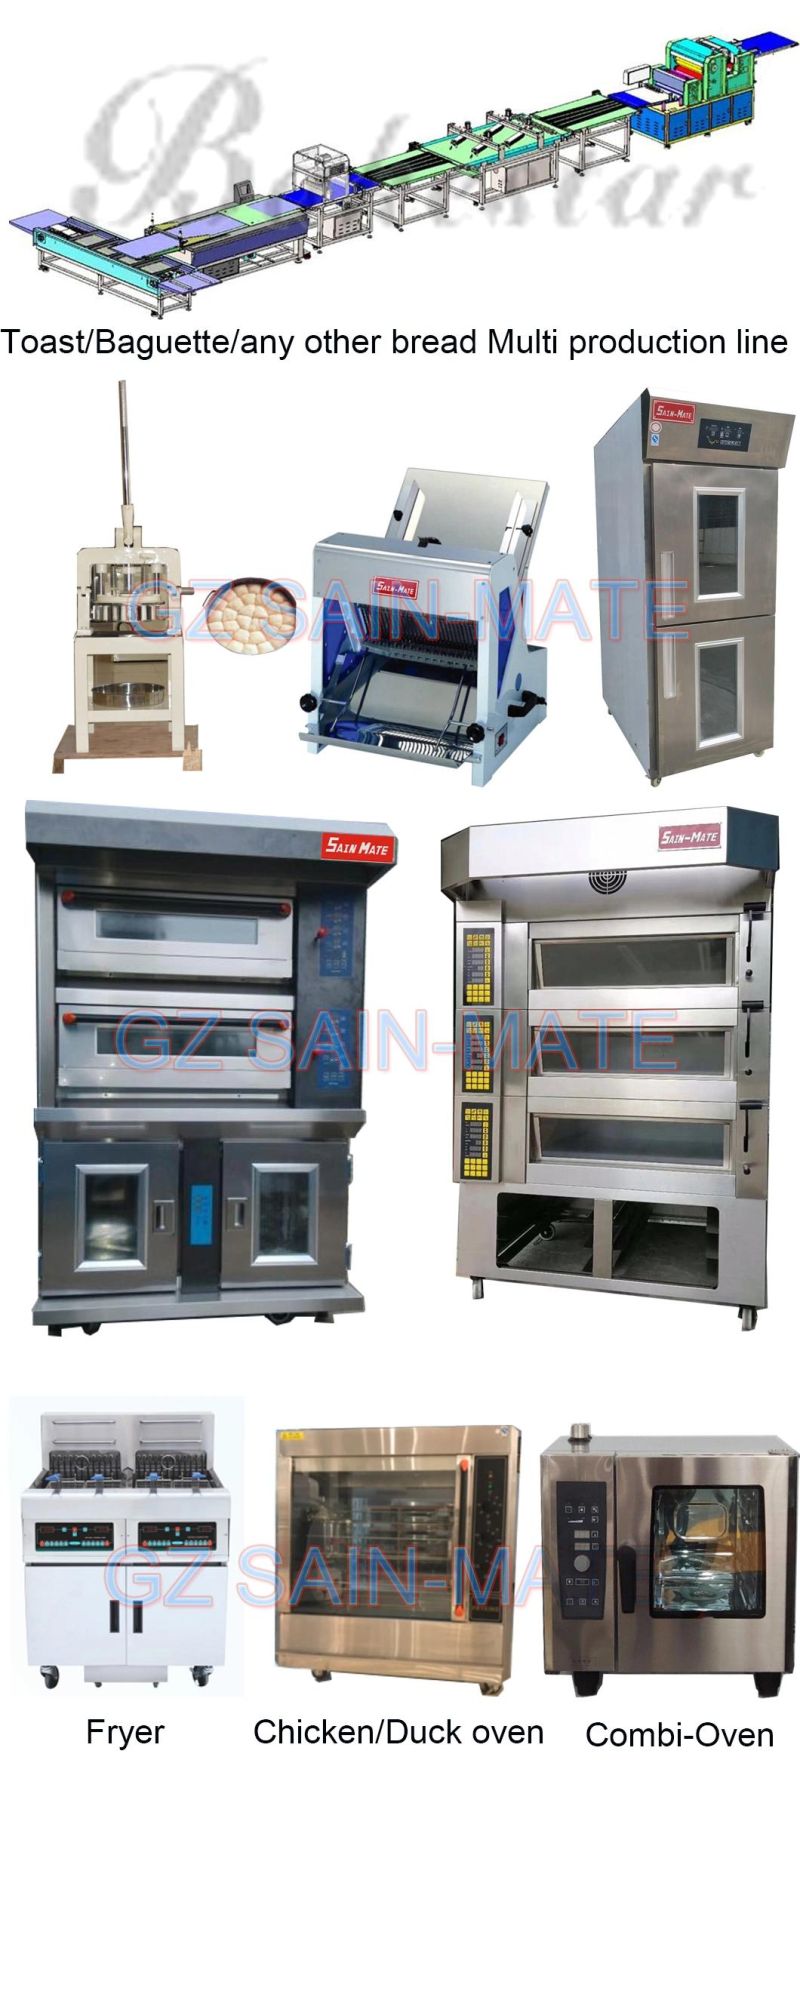 Industrial 32 Trays Gas Diesel Electric Bakery Bread/Cake/Biscuits Rotary Baking Convection Oven